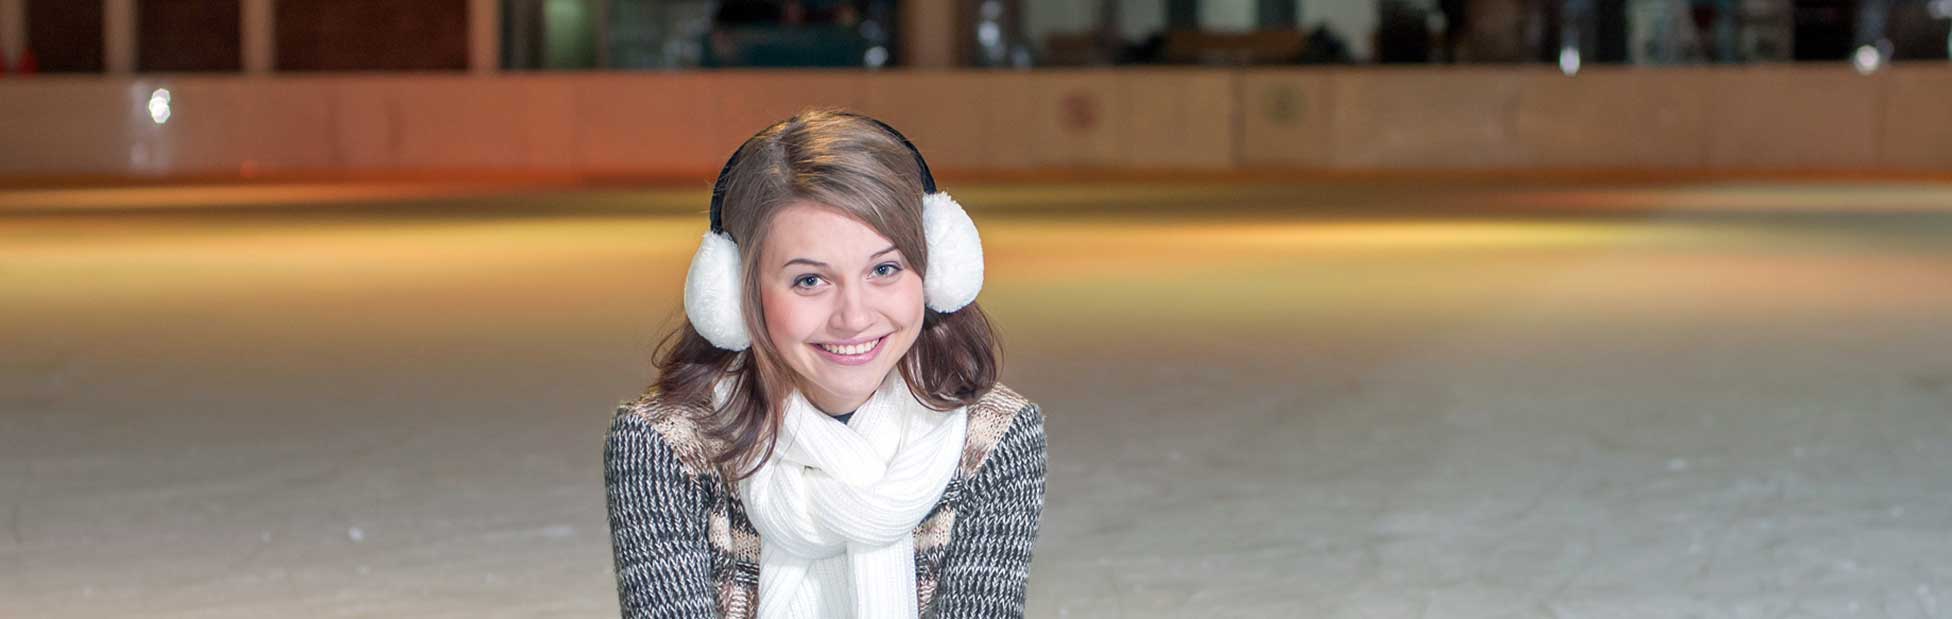 Young girl sitting on an ice rink wearing ear muffs, a scarf to stay warm